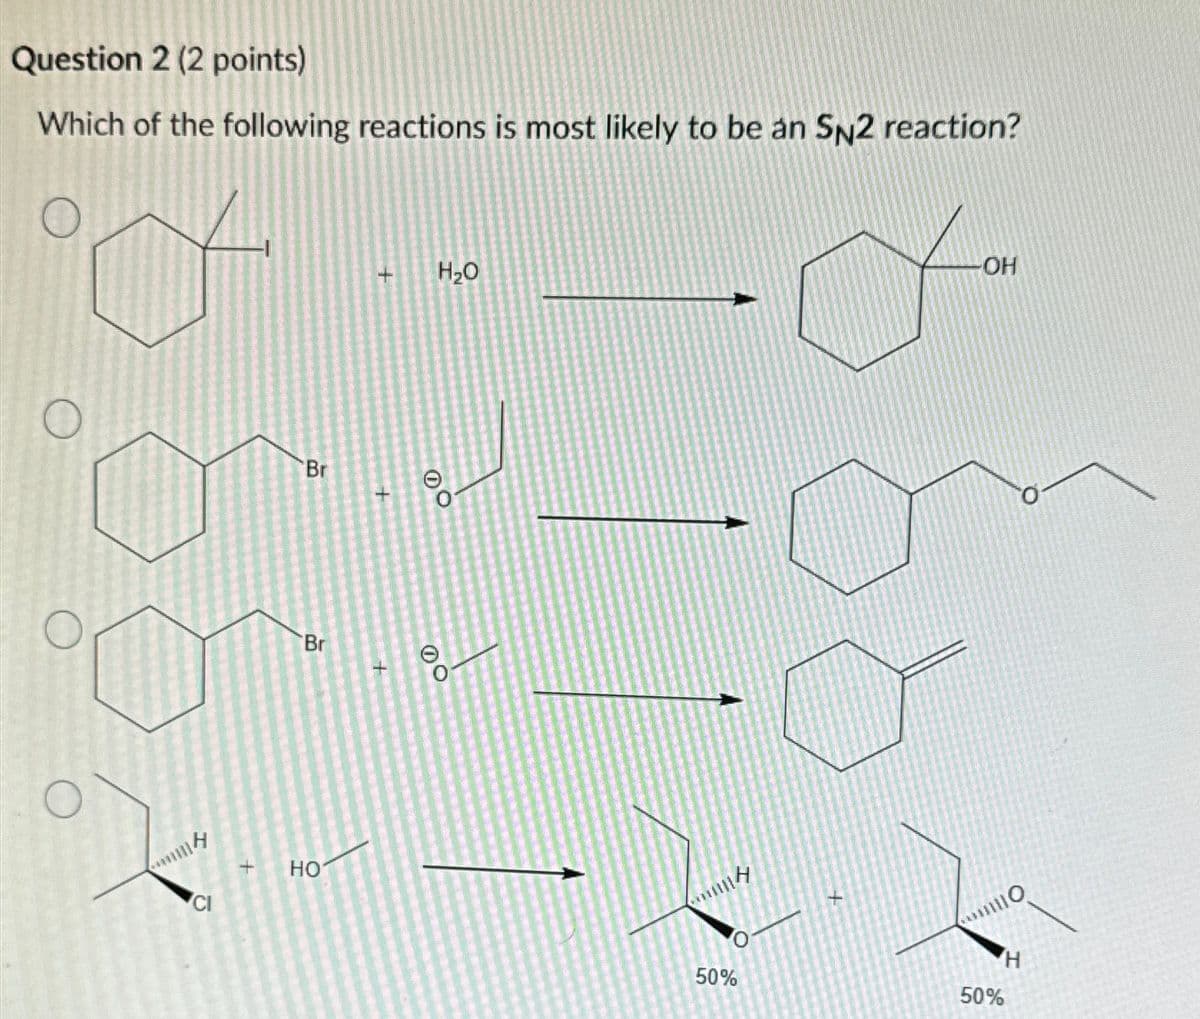 Question 2 (2 points)
Which of the following reactions is most likely to be an SN2 reaction?
mm
CI
Br
Br
+ HO
+
H₂O
DO
-OH
110
H
50%
50%